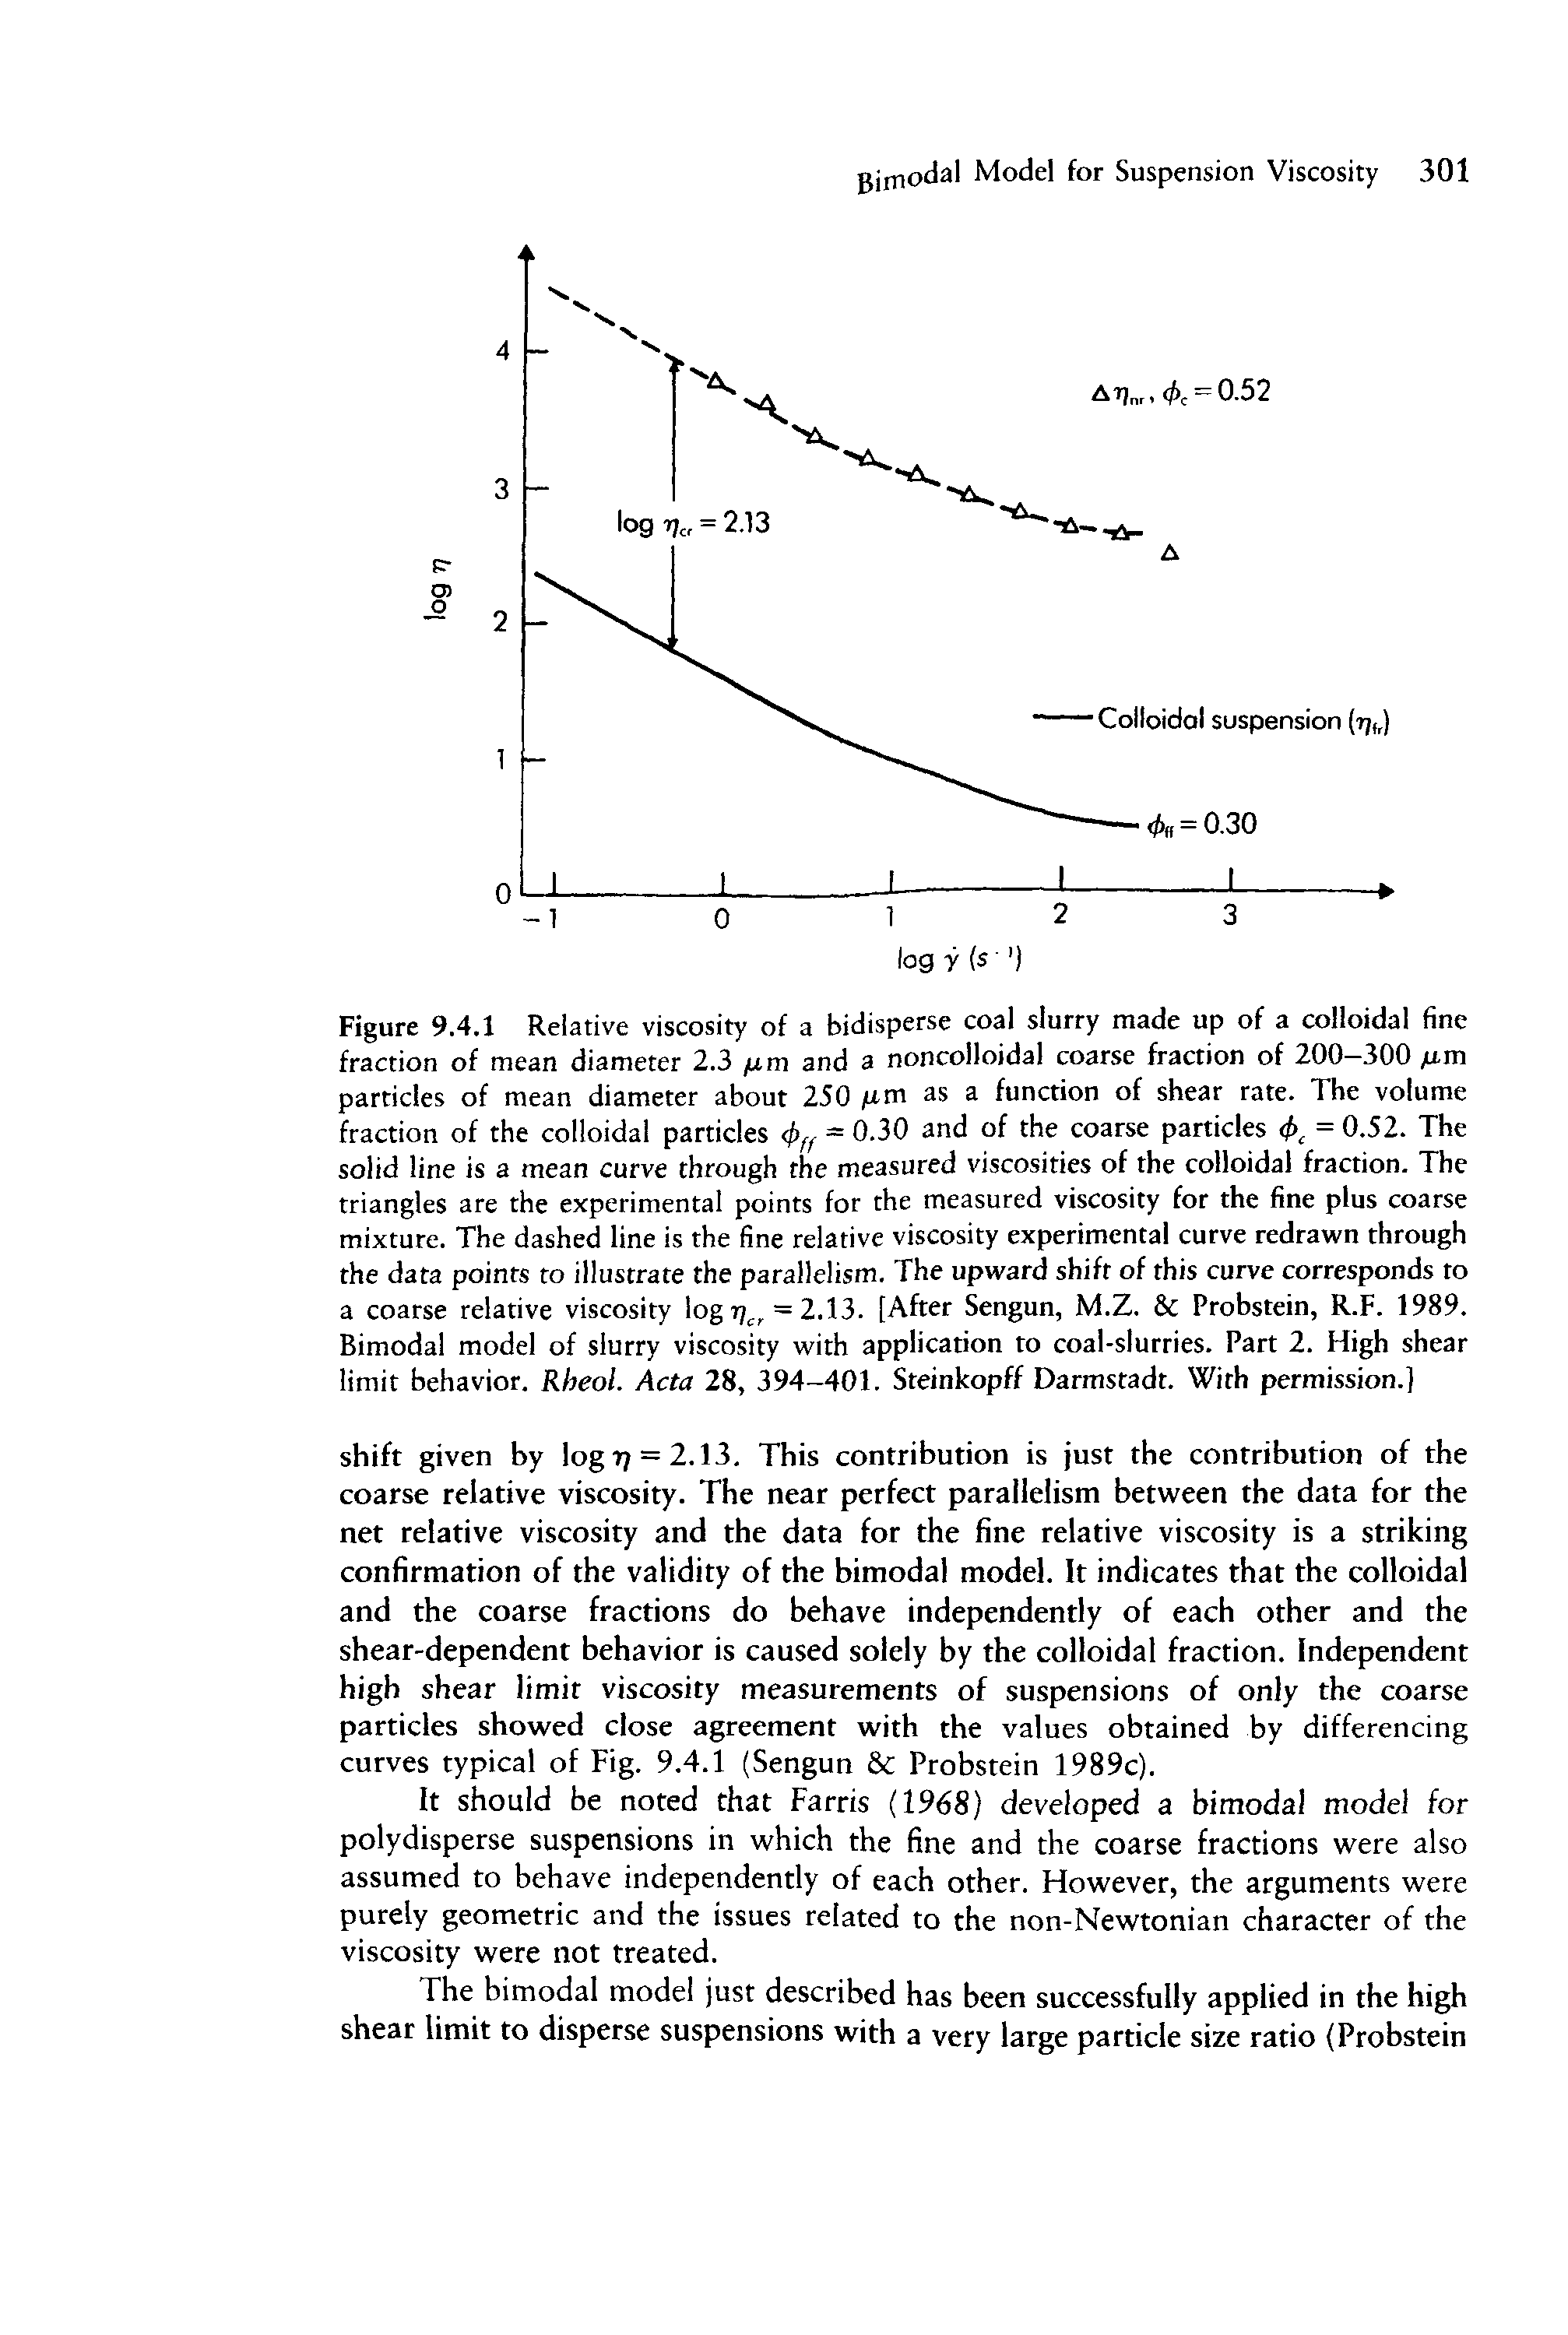 Figure 9.4.1 Relative viscosity of a bidisperse coal slurry made up of a colloidal fine fraction of mean diameter 2.3 /j,m and a noncolloidal coarse fraction of 200—300 m particles of mean diameter about 250 fim as a function of shear rate. The volume fraction of the colloidal particles = 0.30 and of the coarse particles <t>, = 0.52. The solid line is a mean curve through the measured viscosities of the colloidal fraction. The triangles are the experimental points for the measured viscosity for the fine plus coarse mixture. The dashed line is the fine relative viscosity experimental curve redrawn through the data points to illustrate the parallelism. The upward shift of this curve corresponds to a coarse relative viscosity log 77, = 2.13. [After Sengun, M.Z. Probstein, R.F. 1989. Bimodal model of slurry viscosity with application to coal-slurries. Part 2. High shear limit behavior. Rheol. Acta 28, 394-401. Steinkopff Darmstadt. With permission.]...